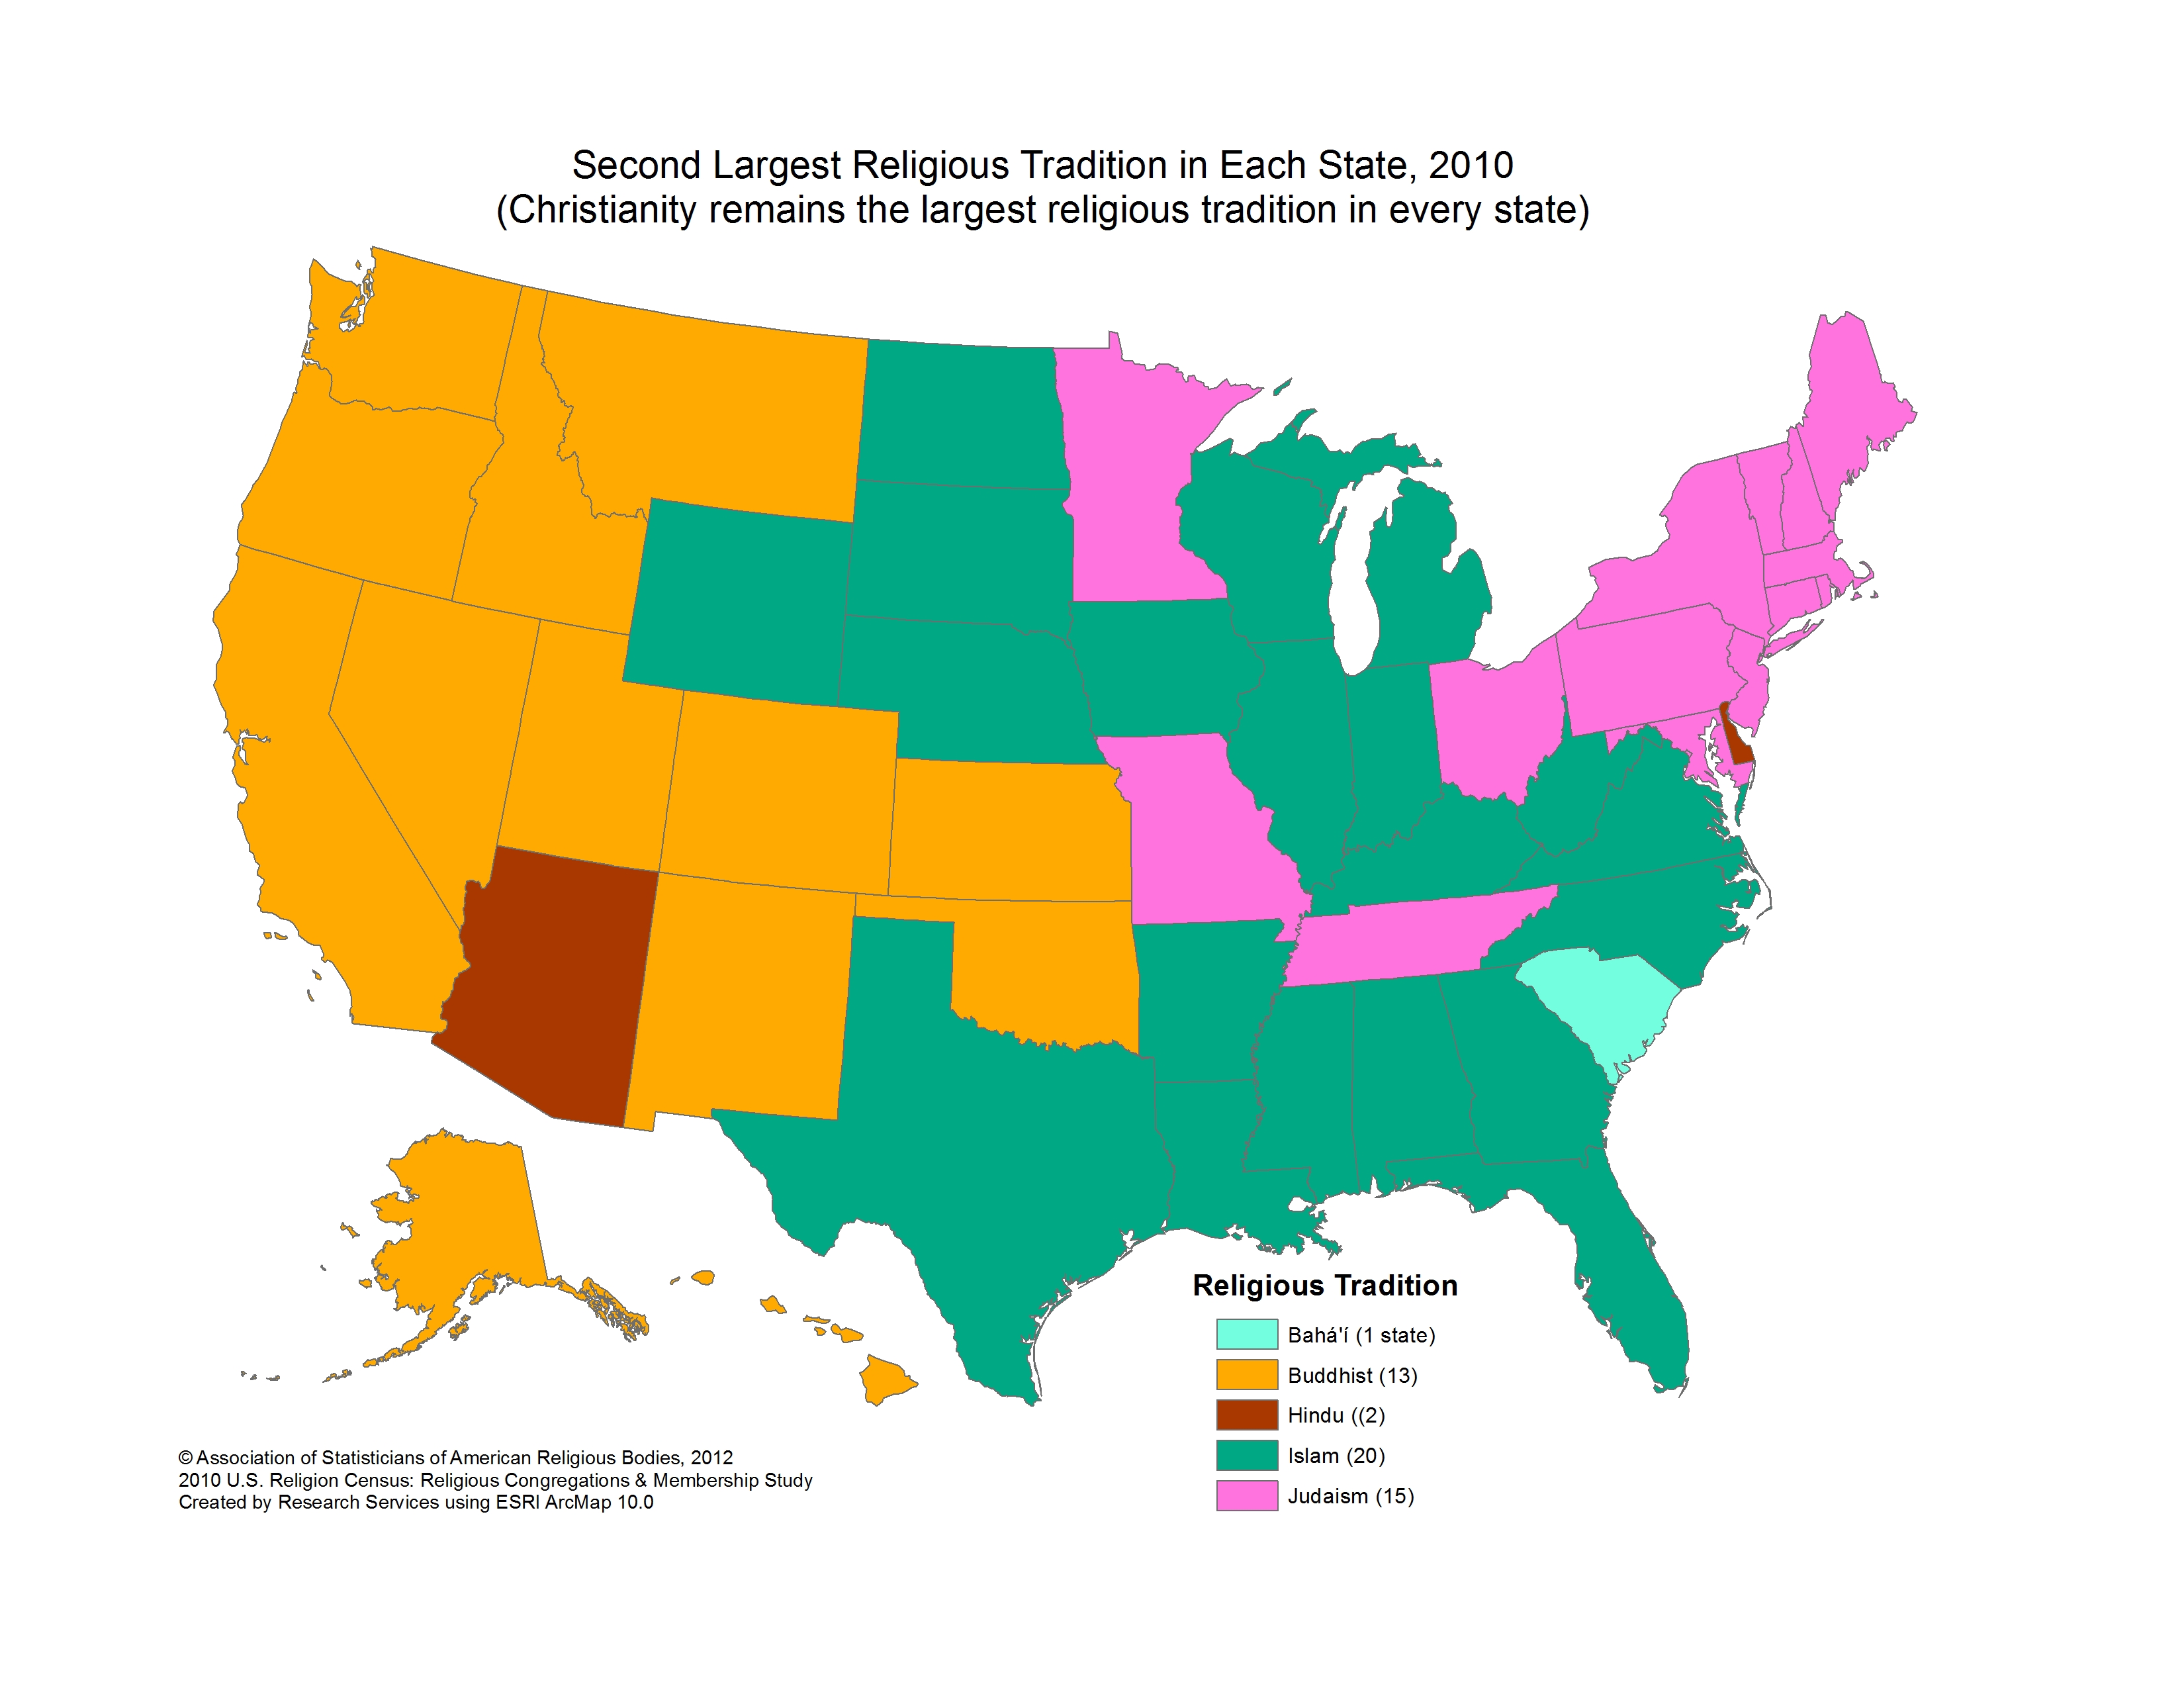 Second Largest Religious Tradition by State